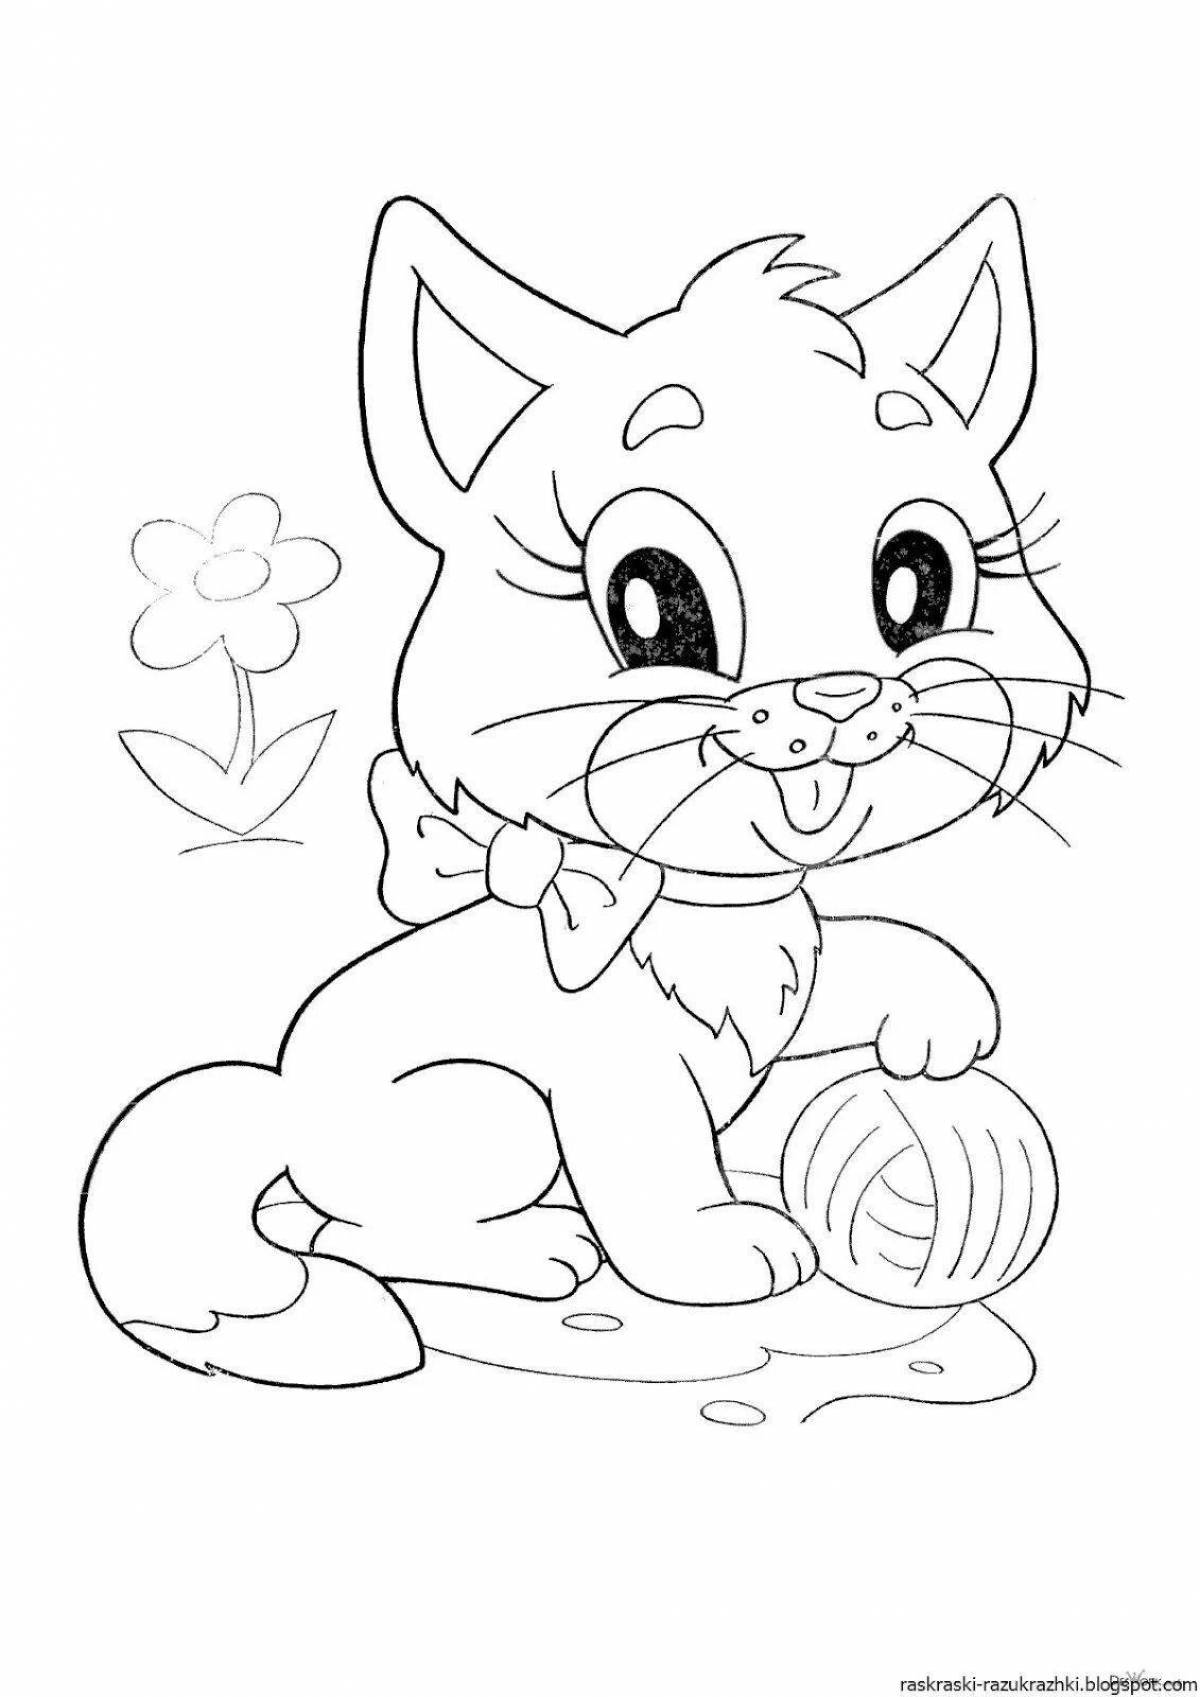 Cute kitten coloring book for kids 5-6 years old